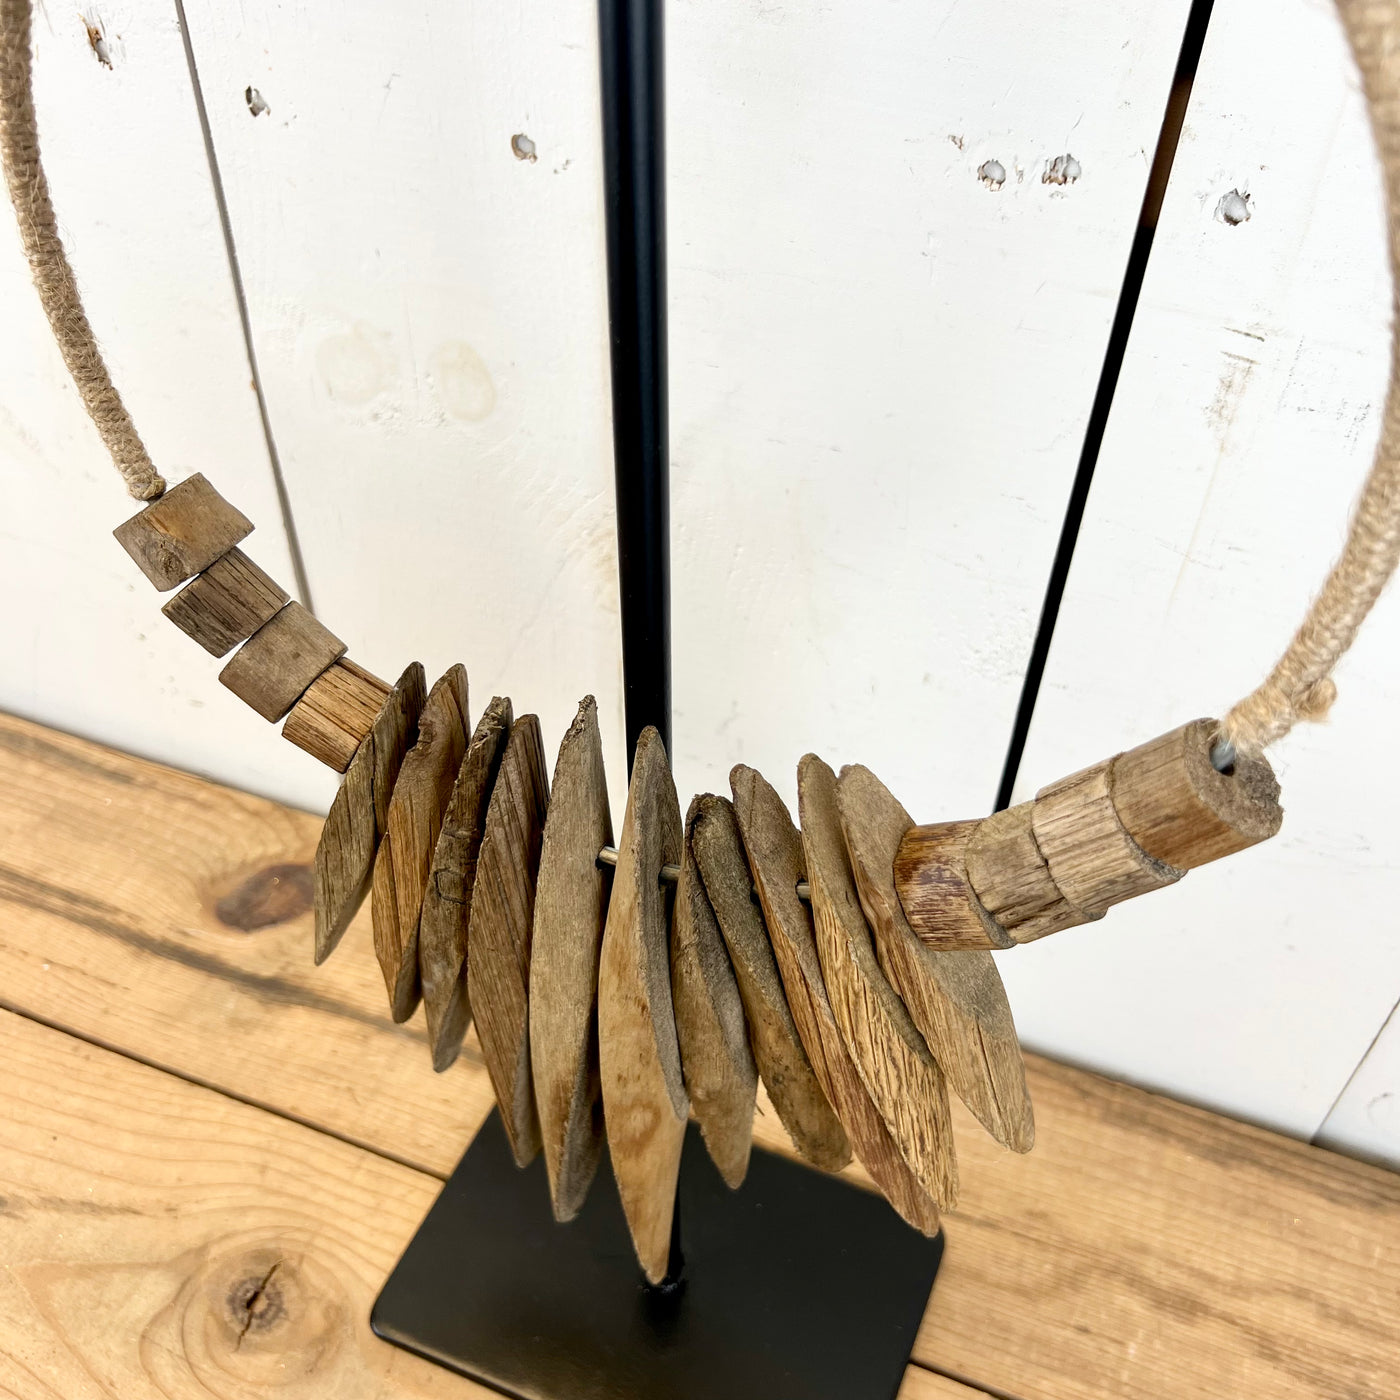 Recycled Wood Necklaces on Iron Stands